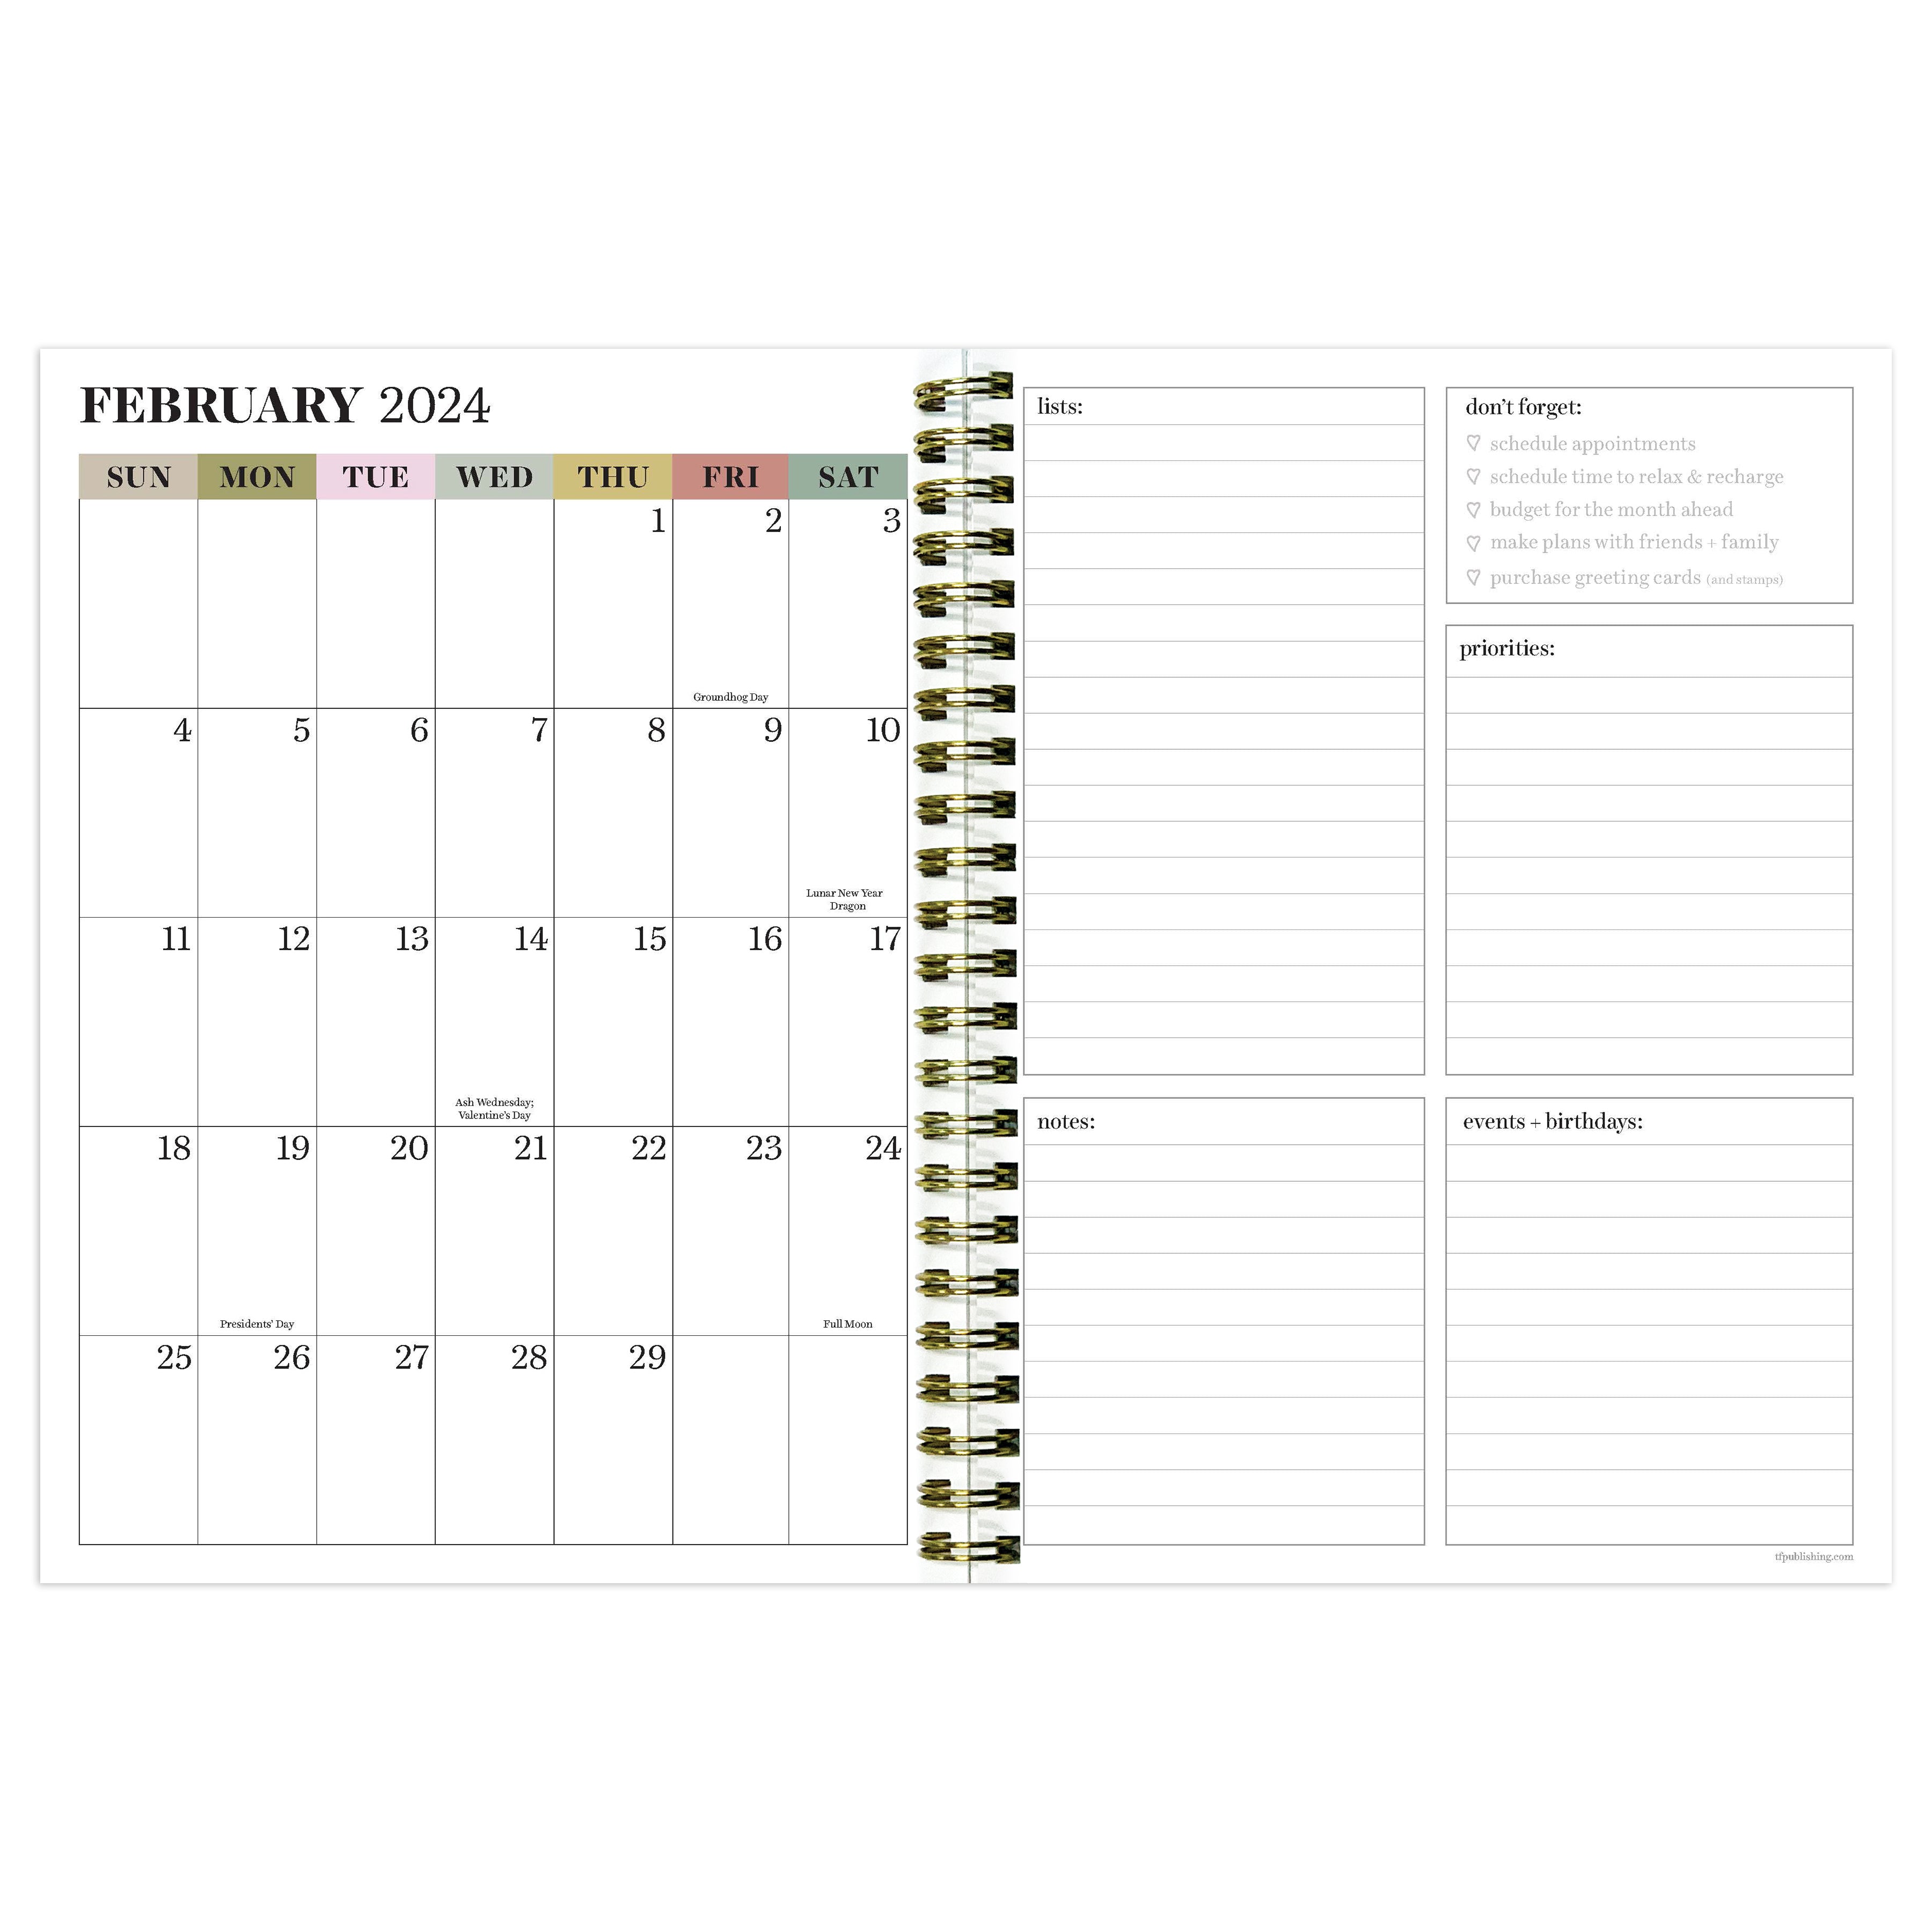 2024 Golden Foliage - Medium Weekly, Monthly Diary/Planner